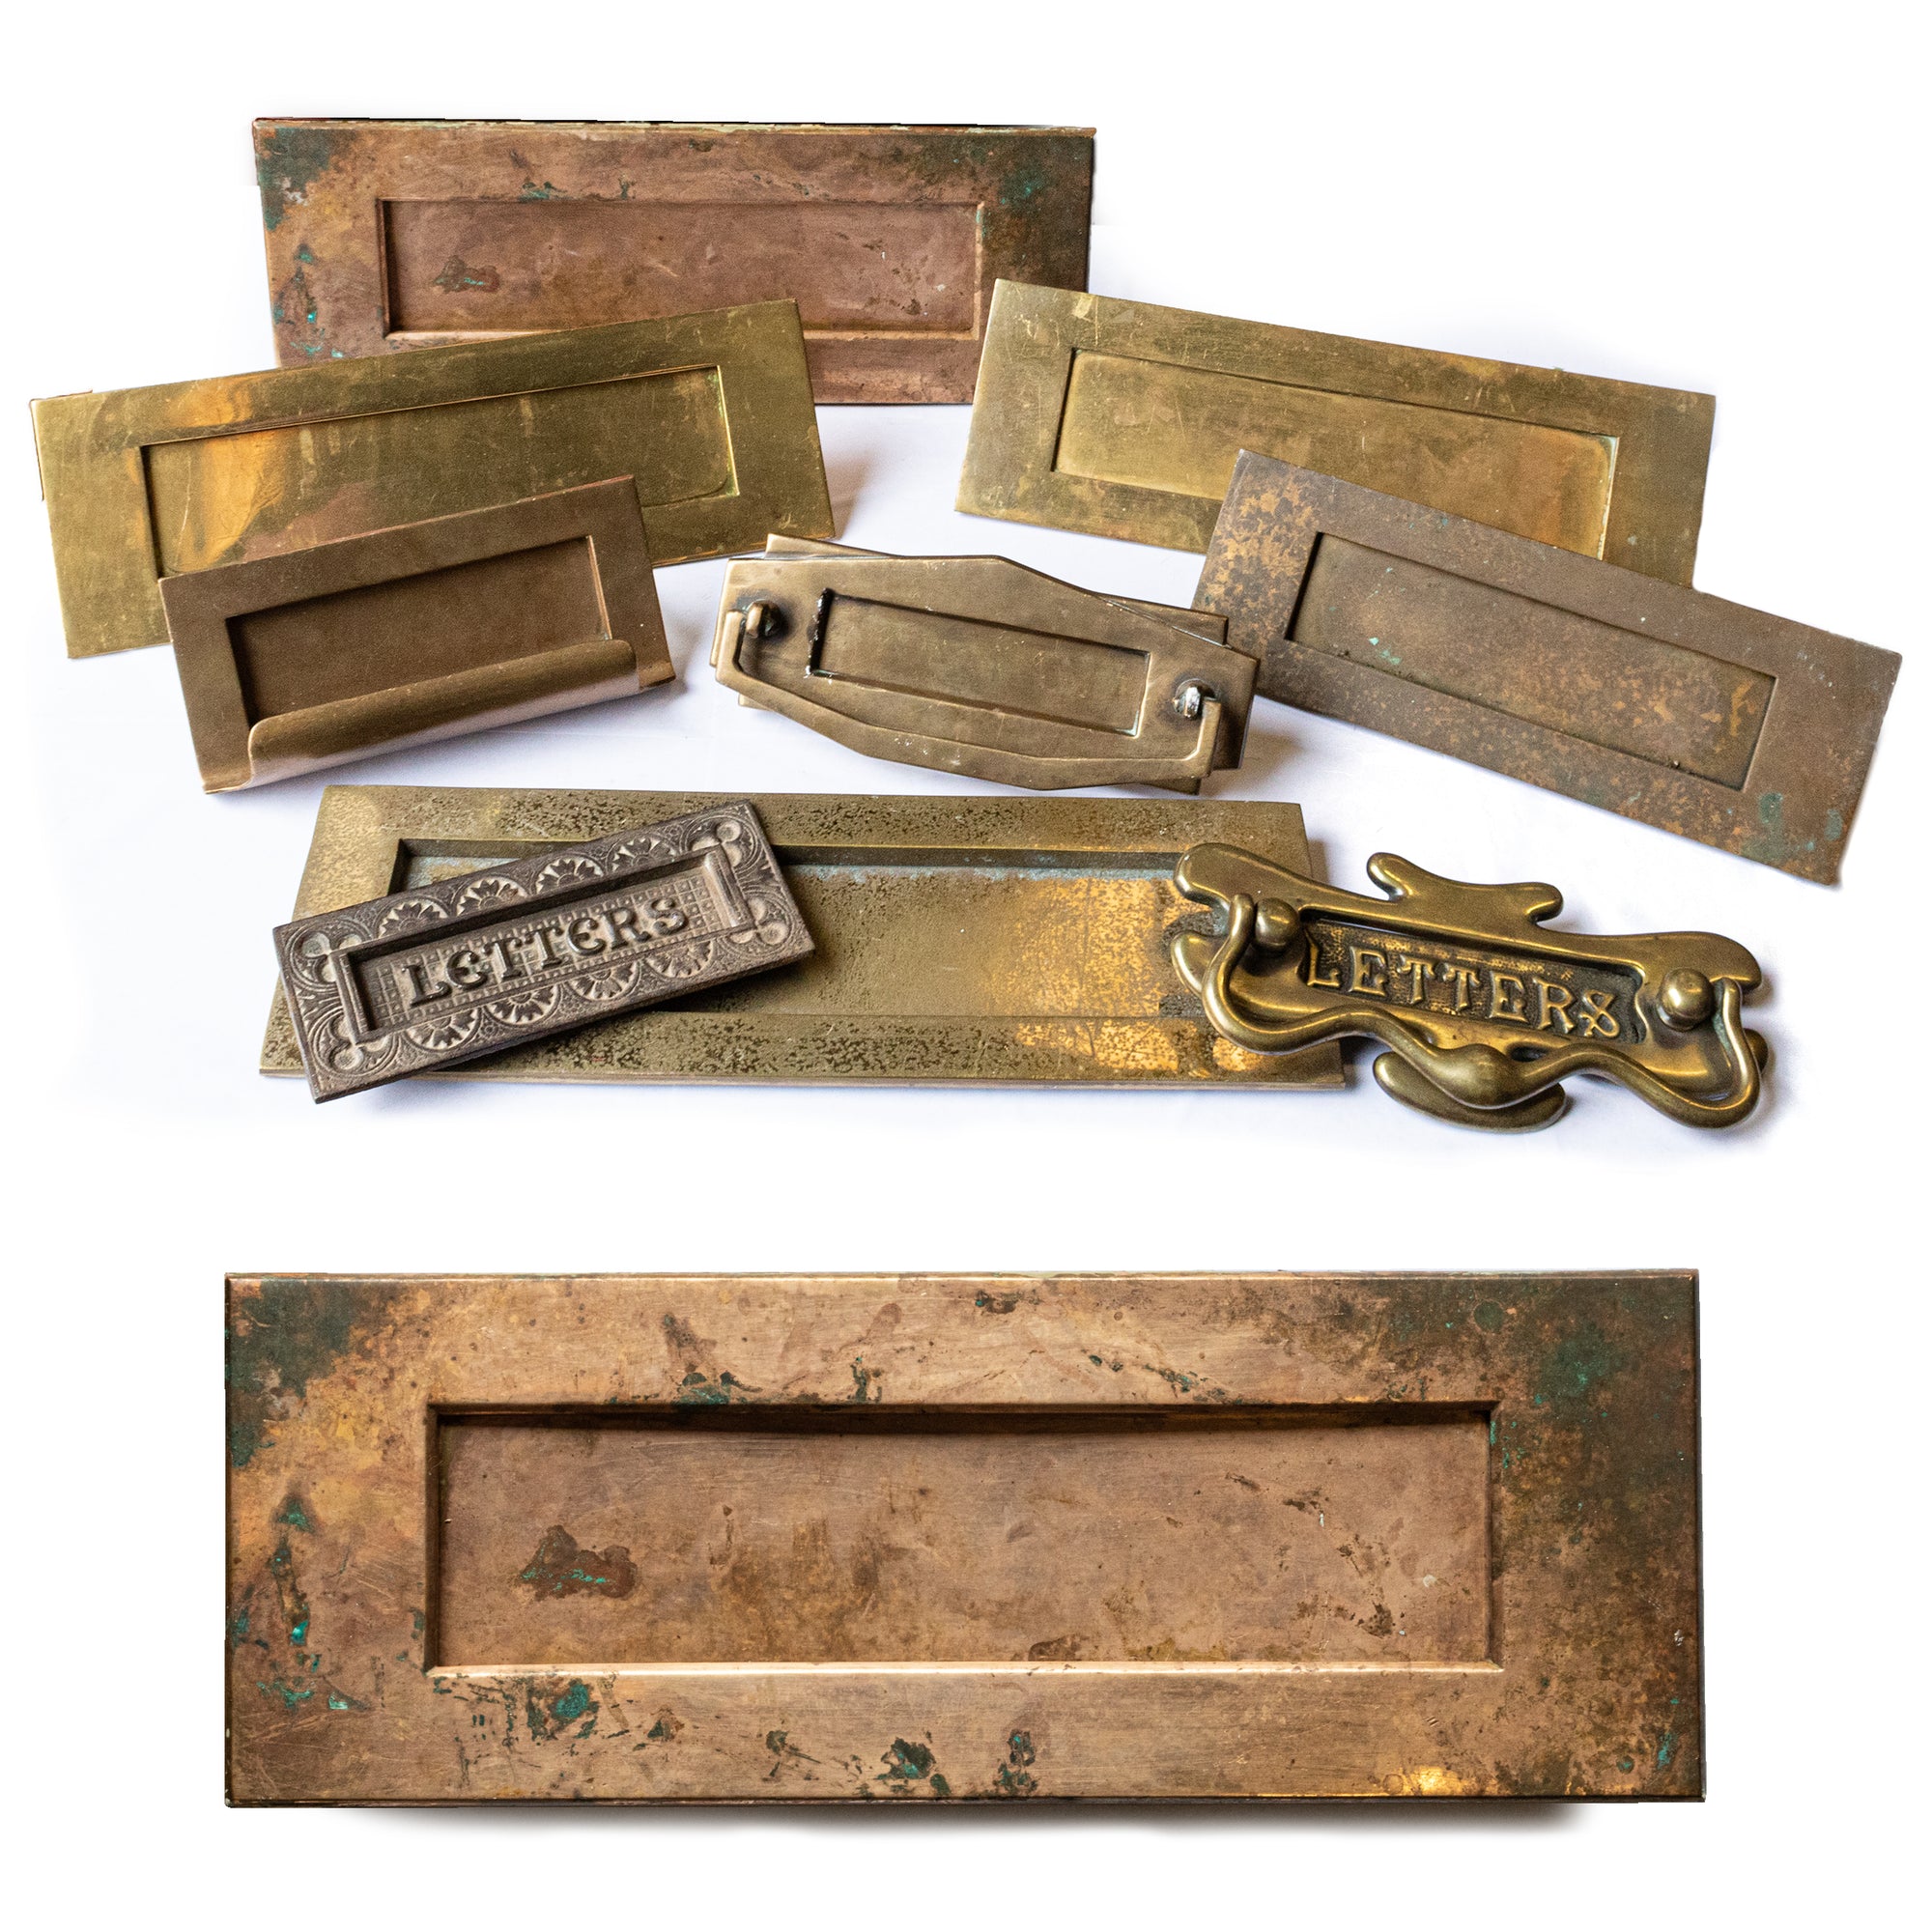 Antique and Reclaimed Brass Letterboxes | The Architectural Forum